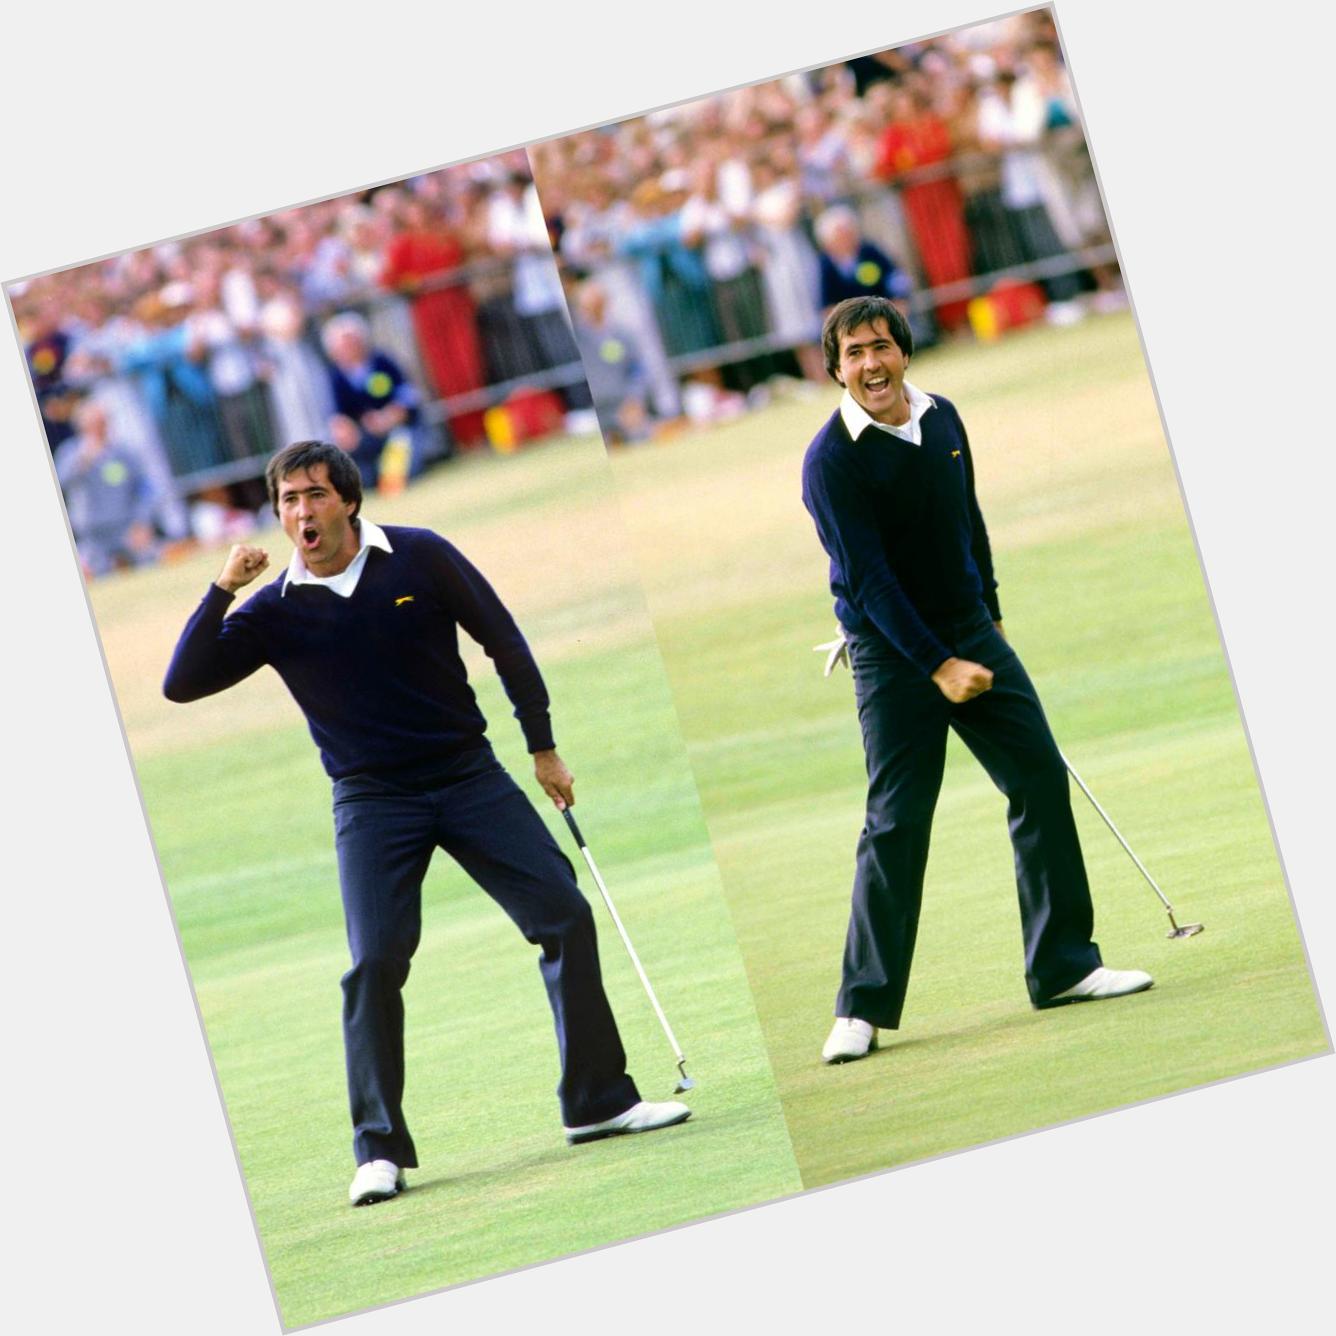 35 years ago...

Happy Birthday to the late, great Seve Ballesteros. 